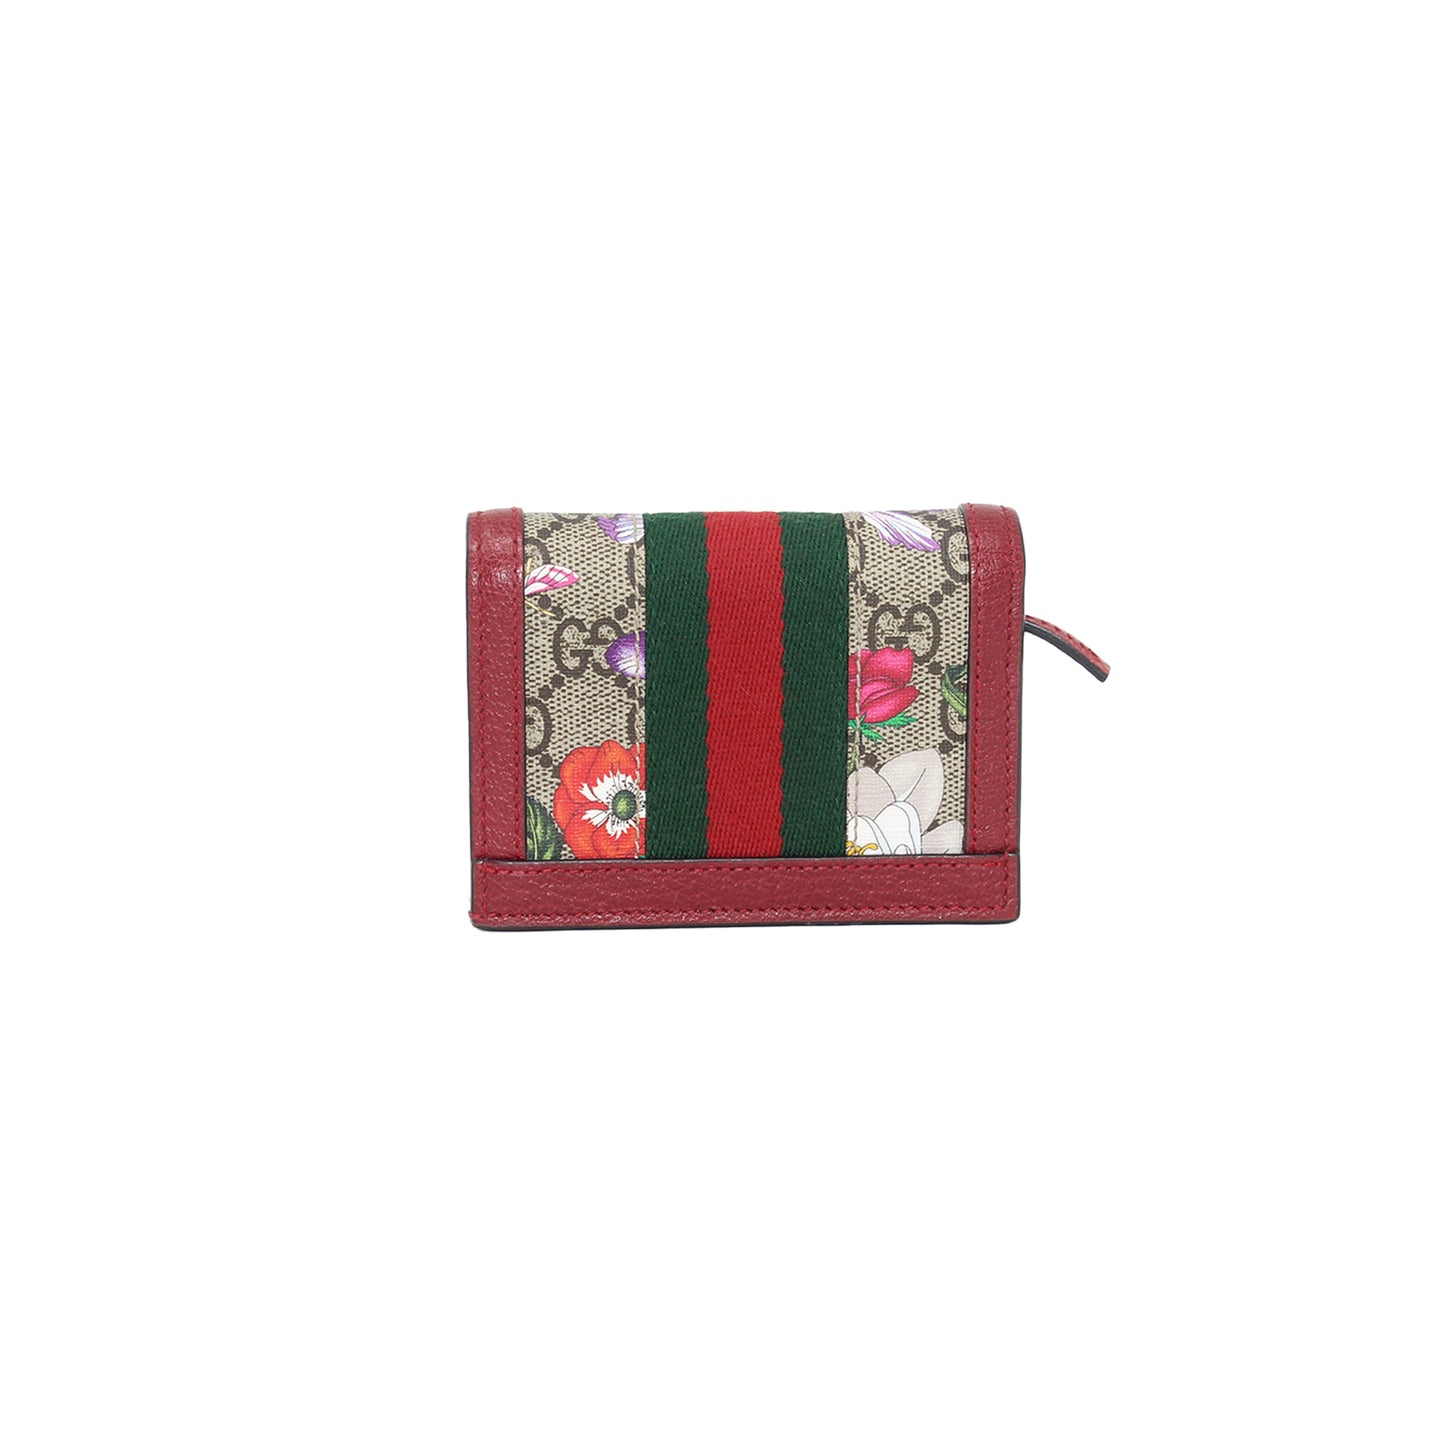 Gucci Flora GG Mini Wallet with dustbag and box